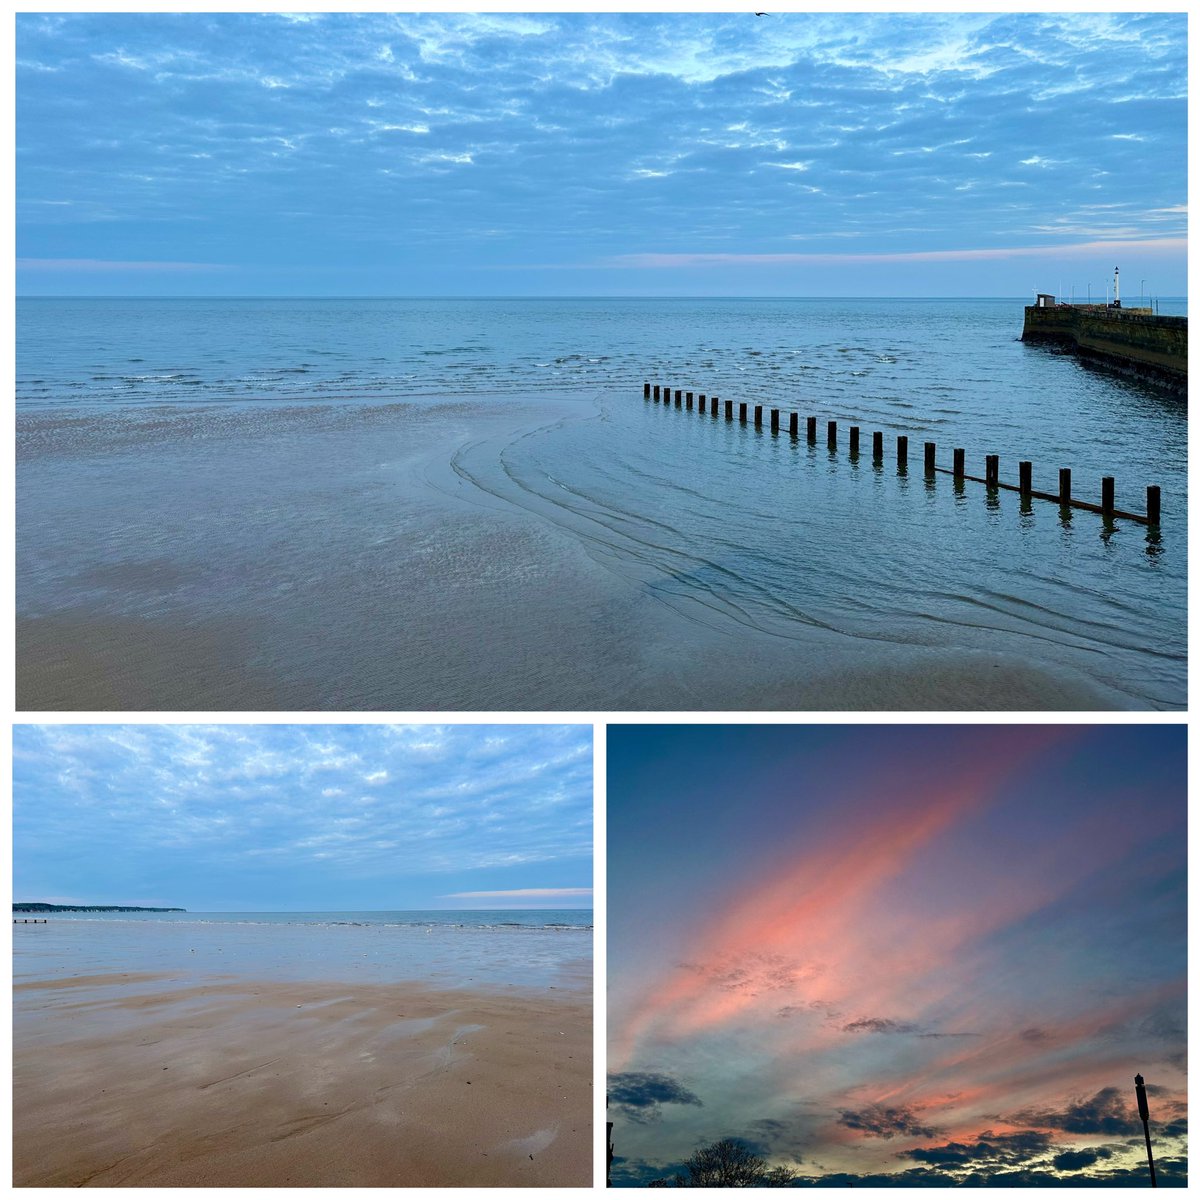 After a few hours of painting/decorating, it’s time to hit the beach for a walk as the sun goes down #Bridlington